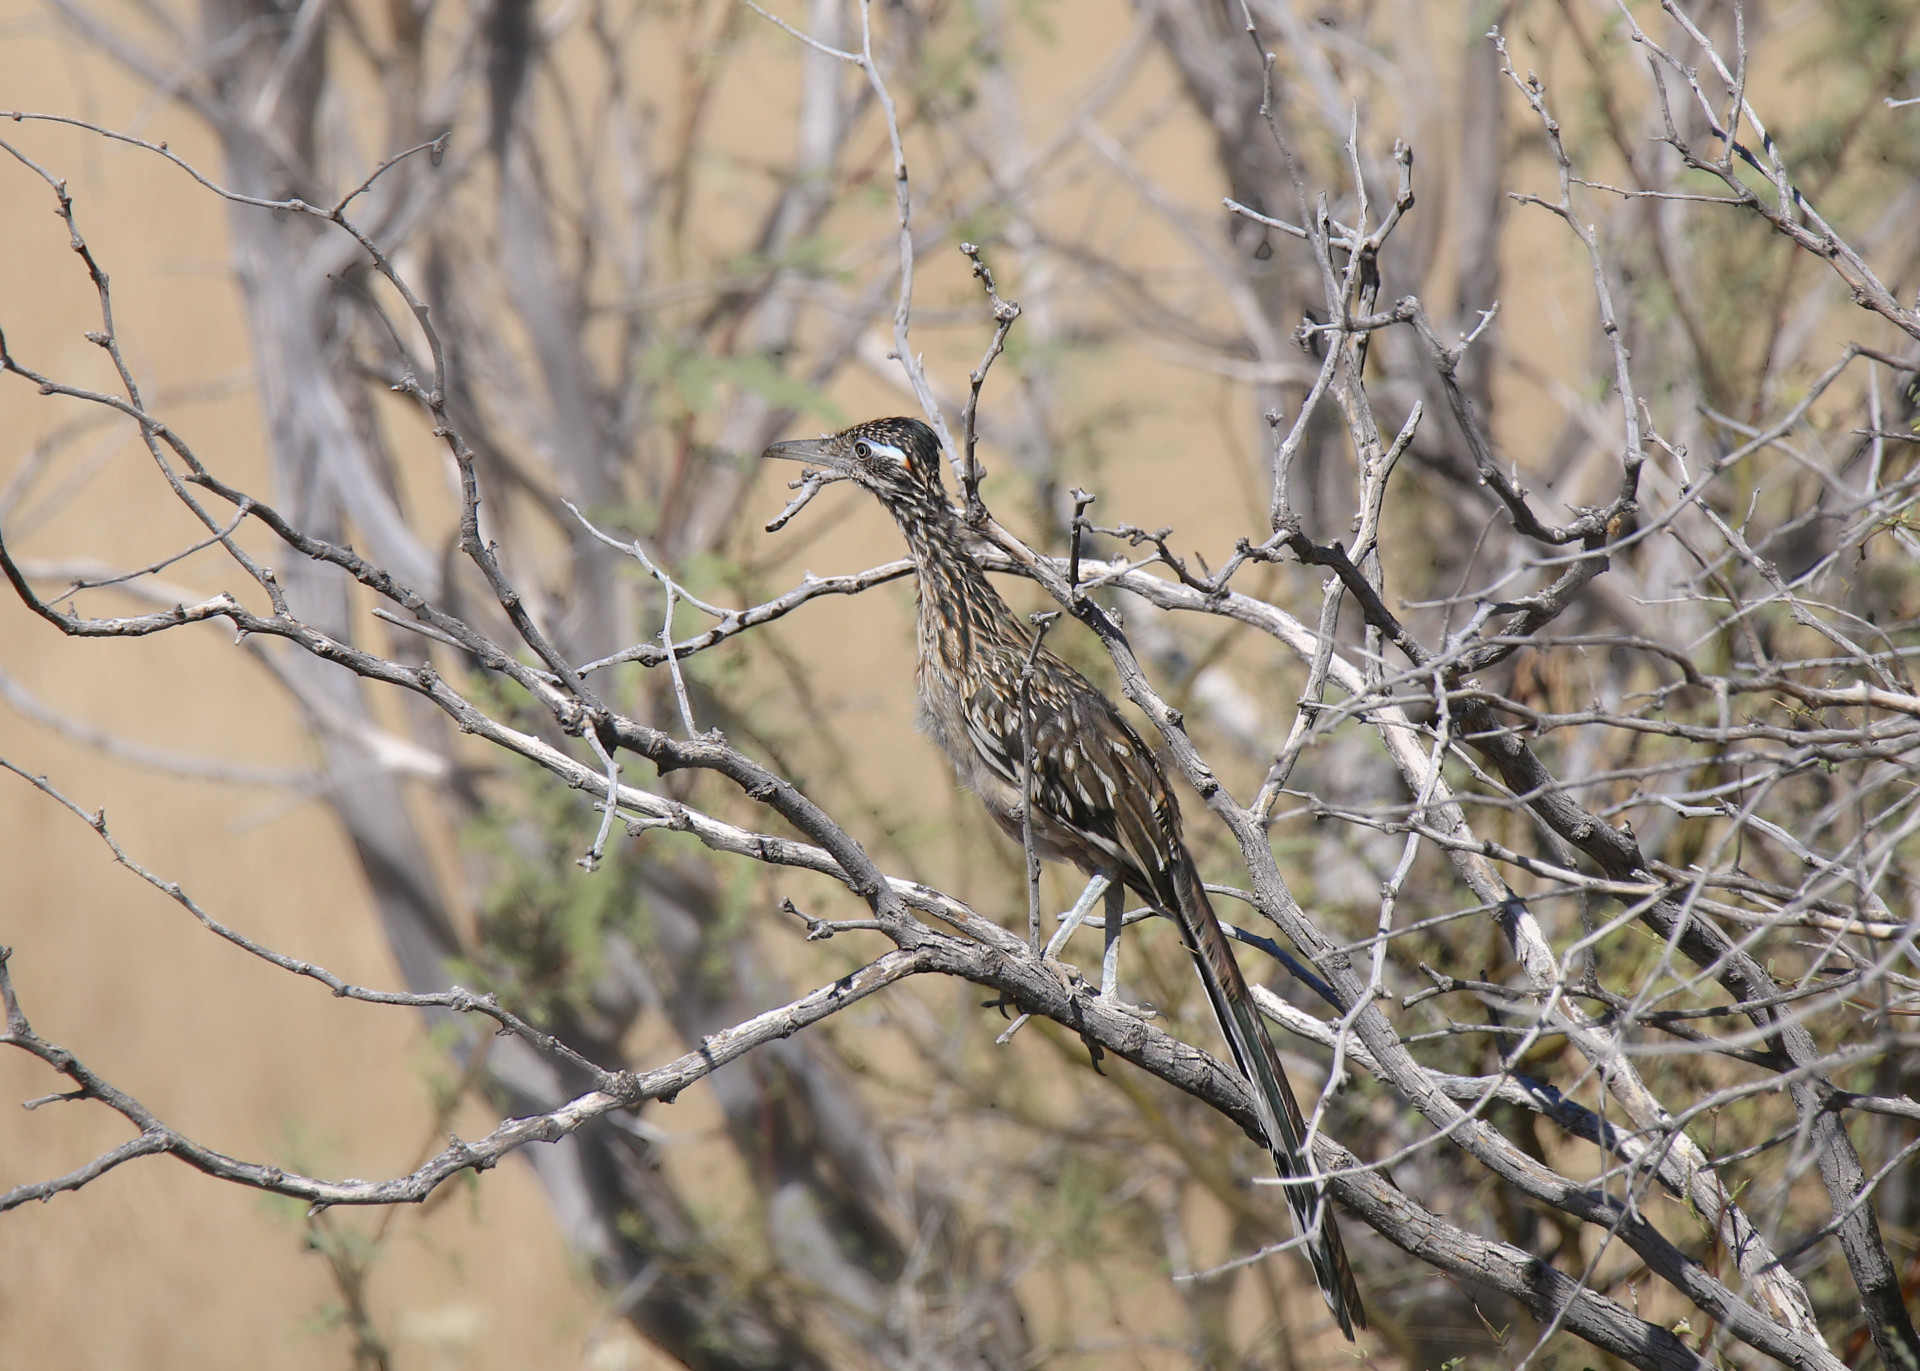 Wildlife enthusiasts should look out for roadrunner (picture), the vermilion flycatcher, and the whiskered screech owl.